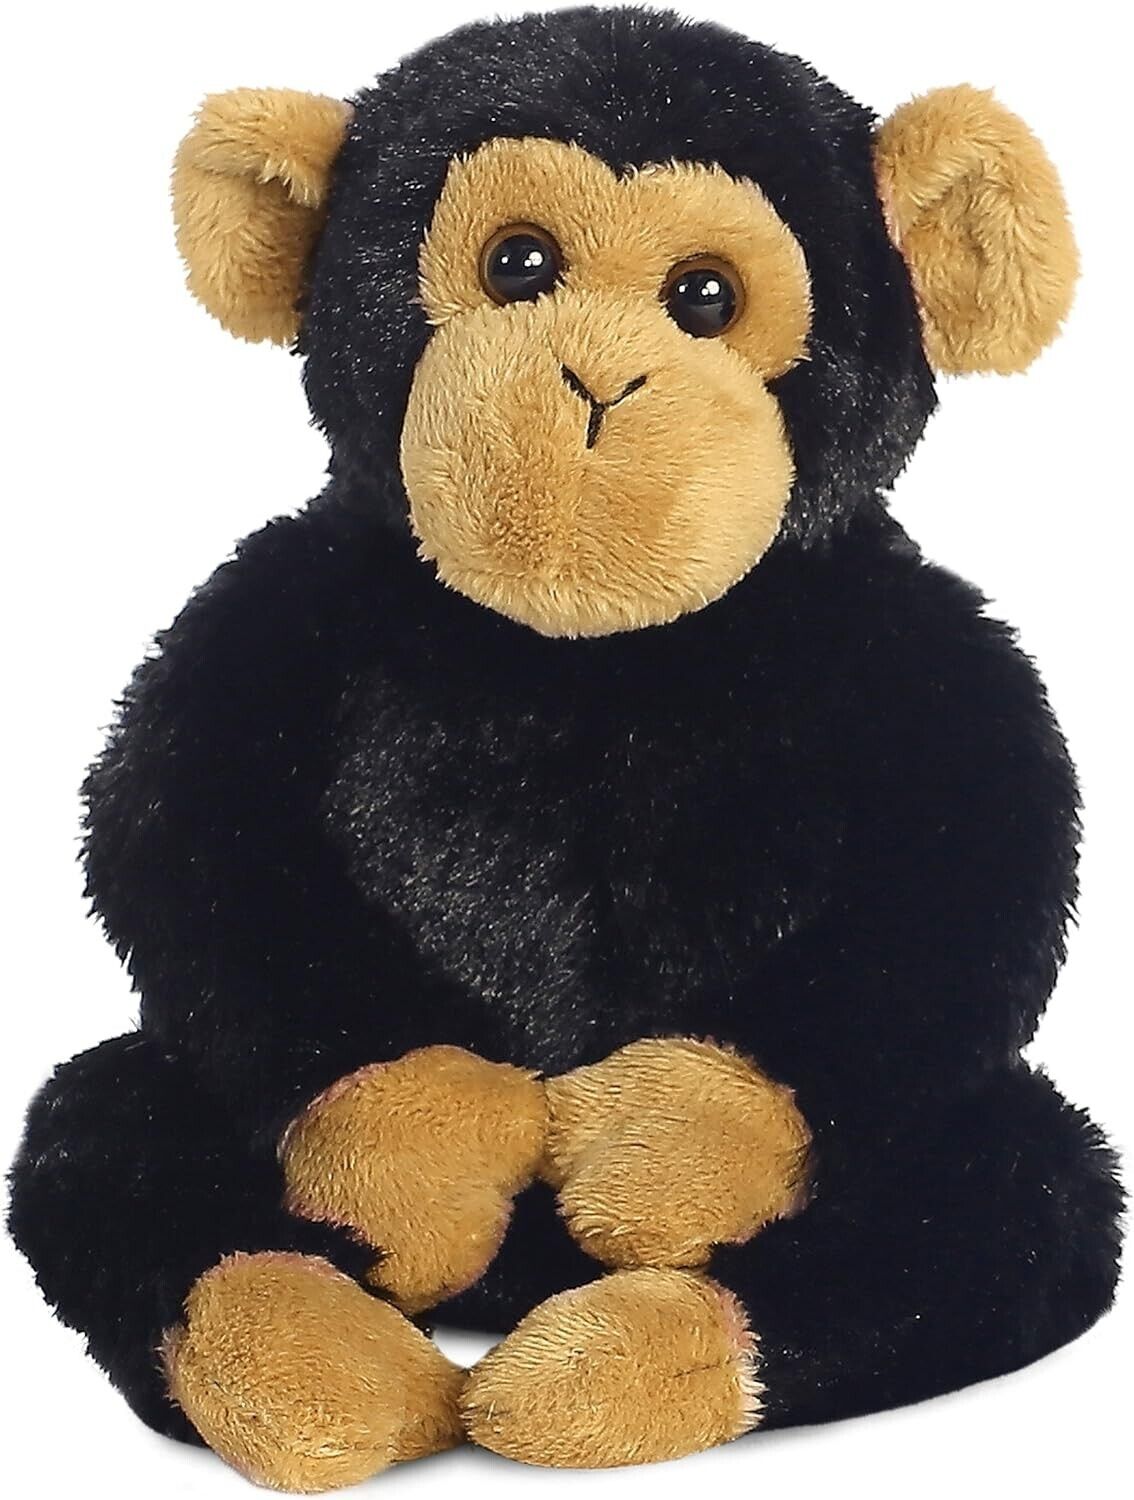 Aurora, 31710, Mini Flopsies Clyde the Chimp, 8In, Soft Toy, Black and Brown